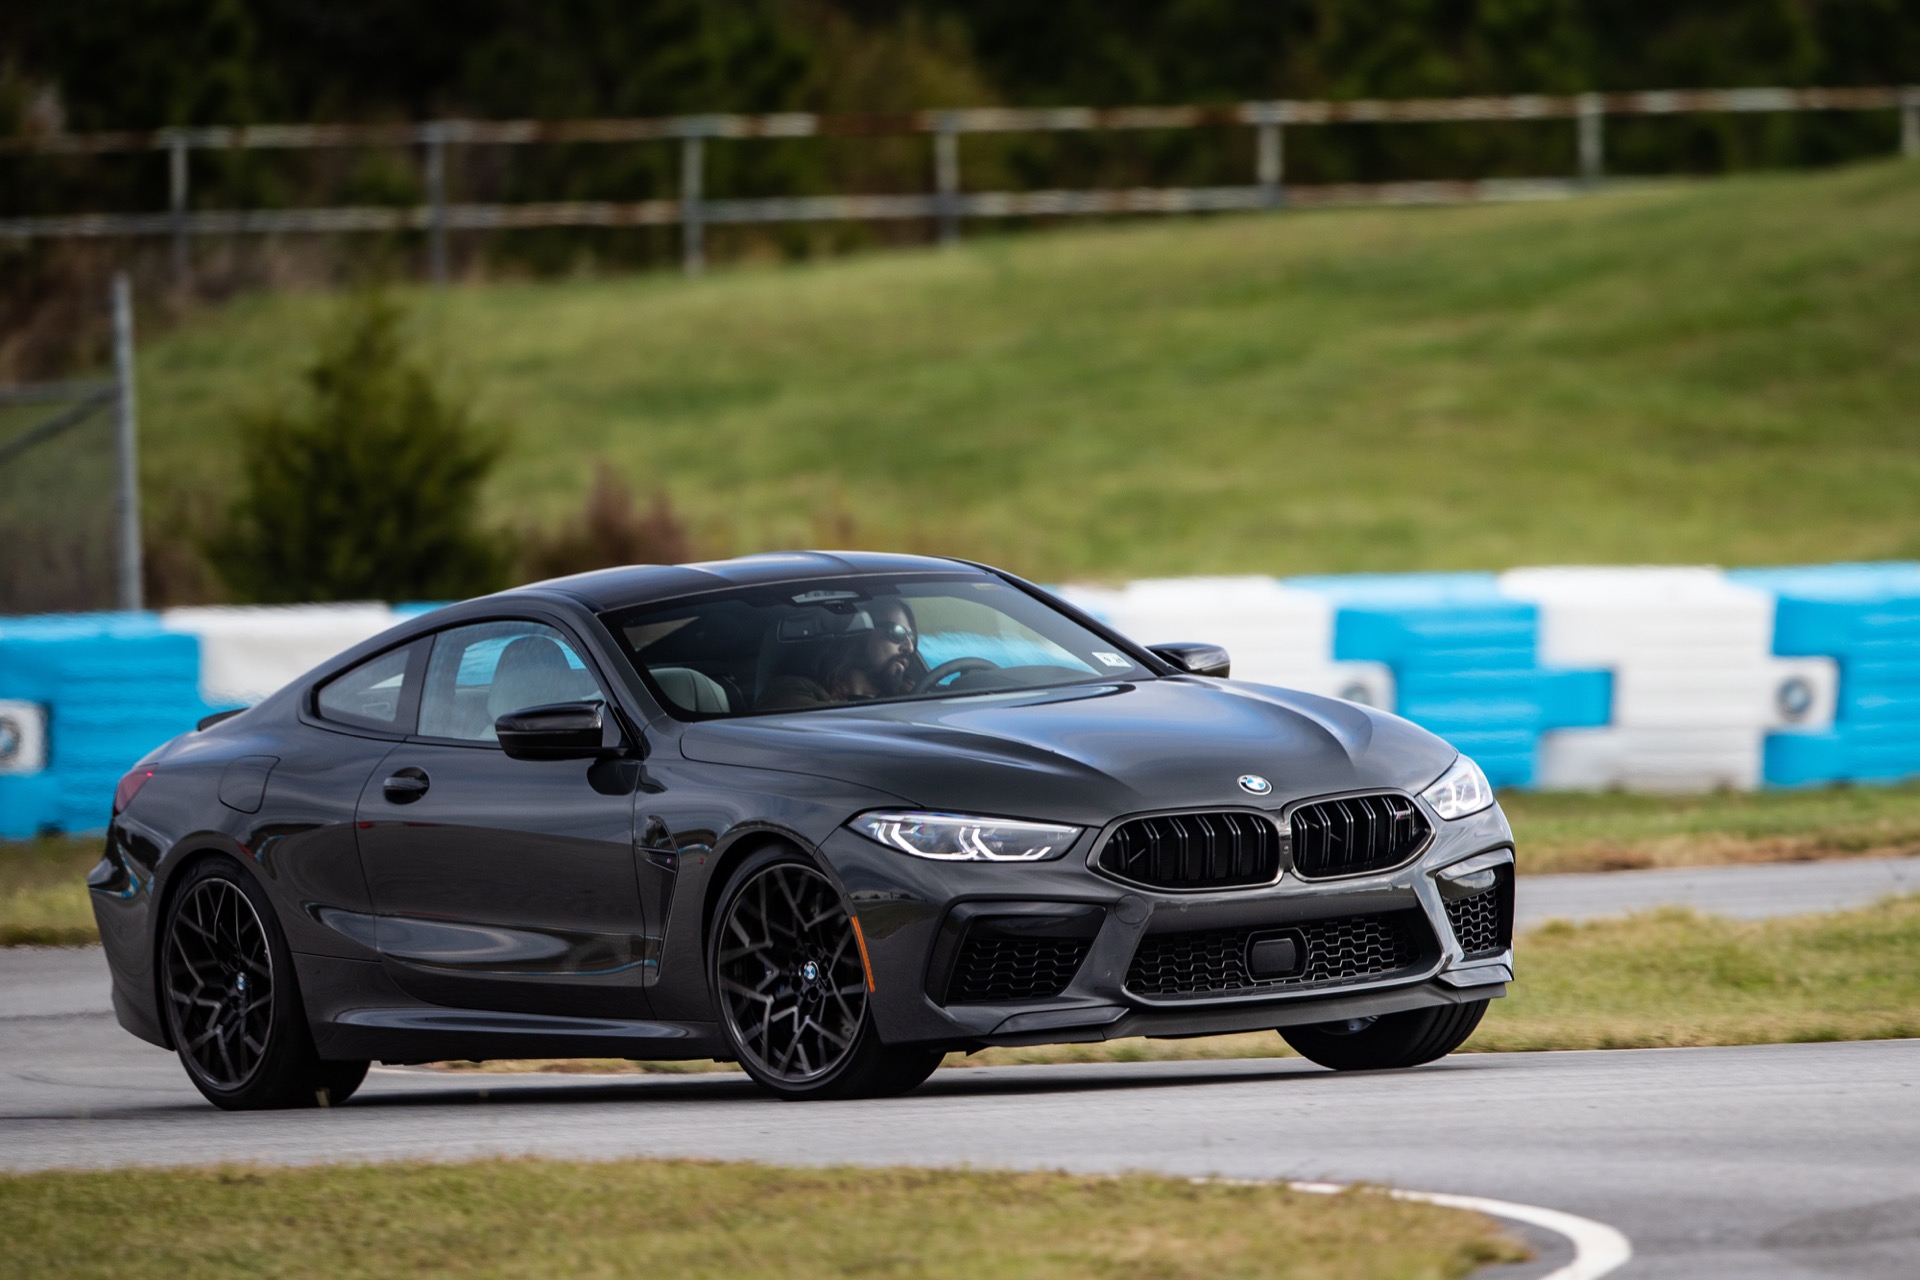 First drive review: The 2020 BMW M8 may be a large coupe, but it cooks